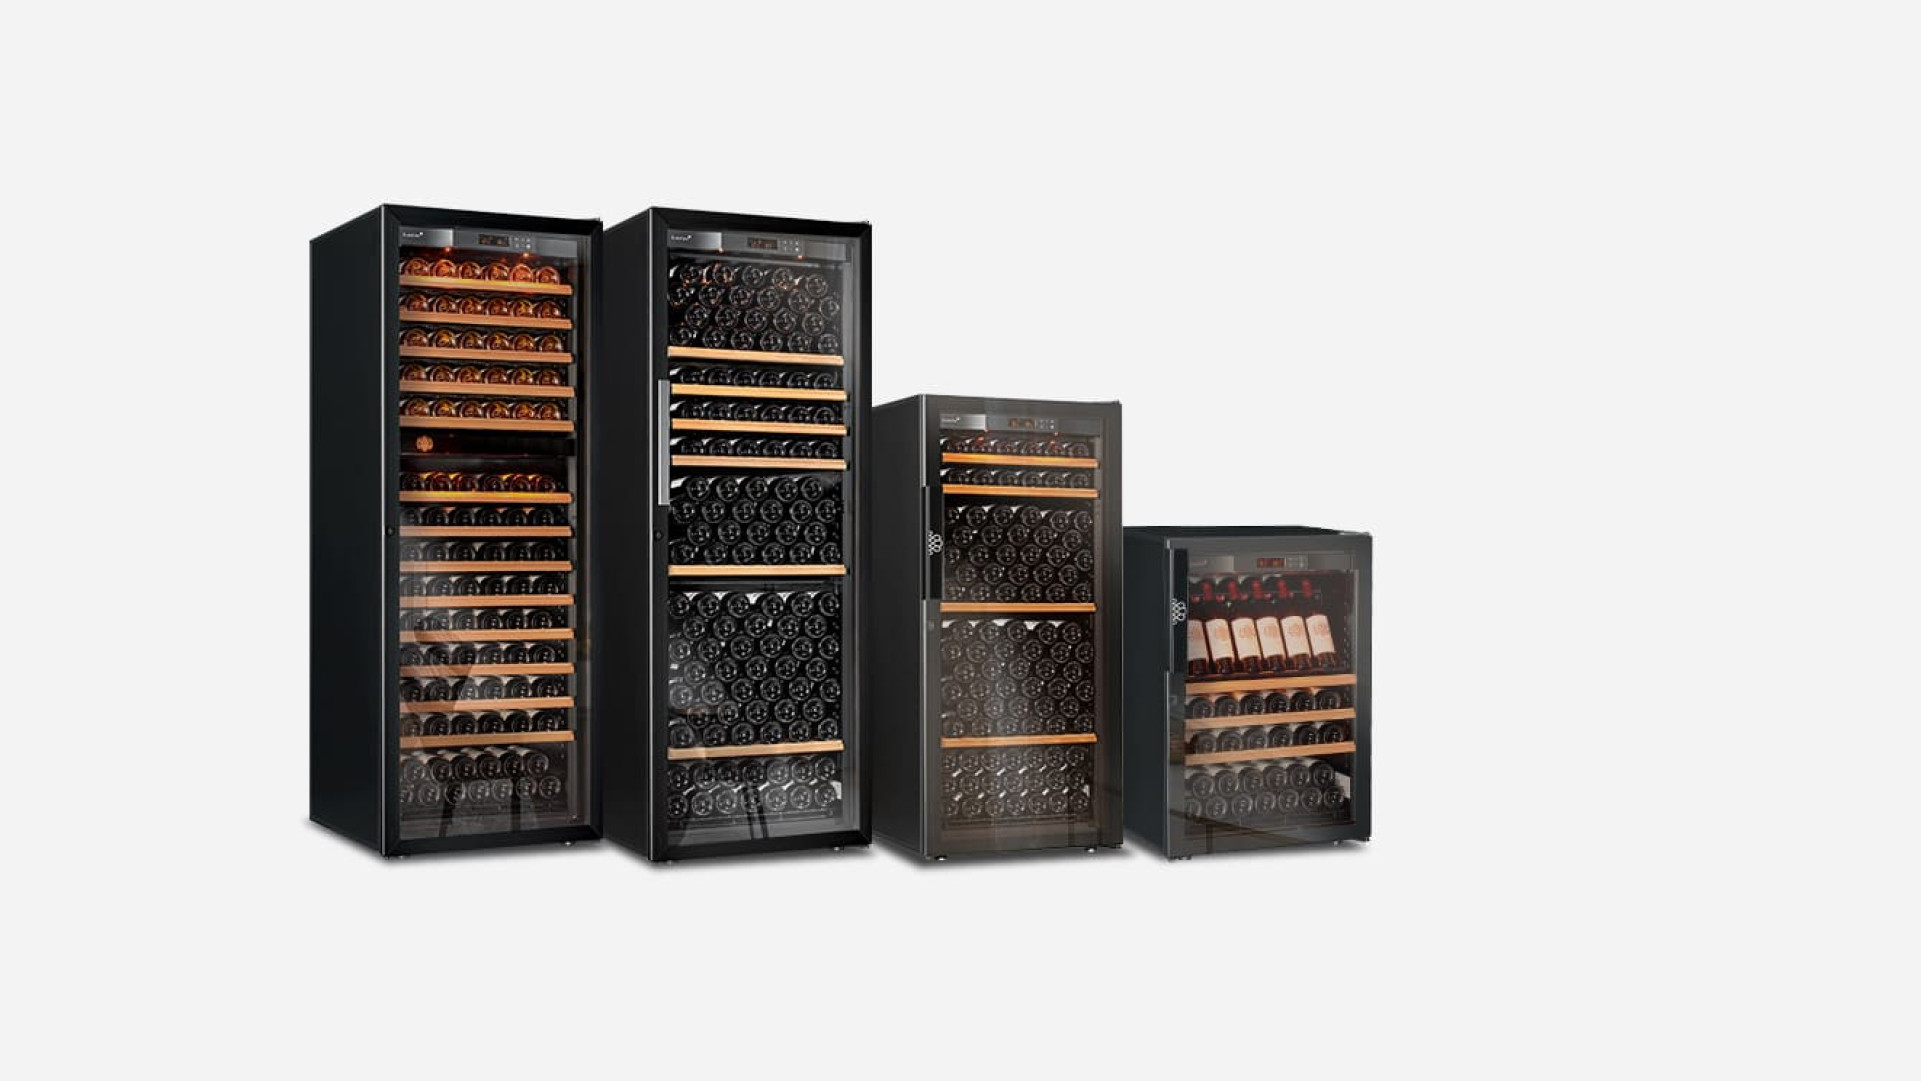 This range of EuroCave wine coolers offers the widest choice of doors, sizes, functions and types of wine storage.